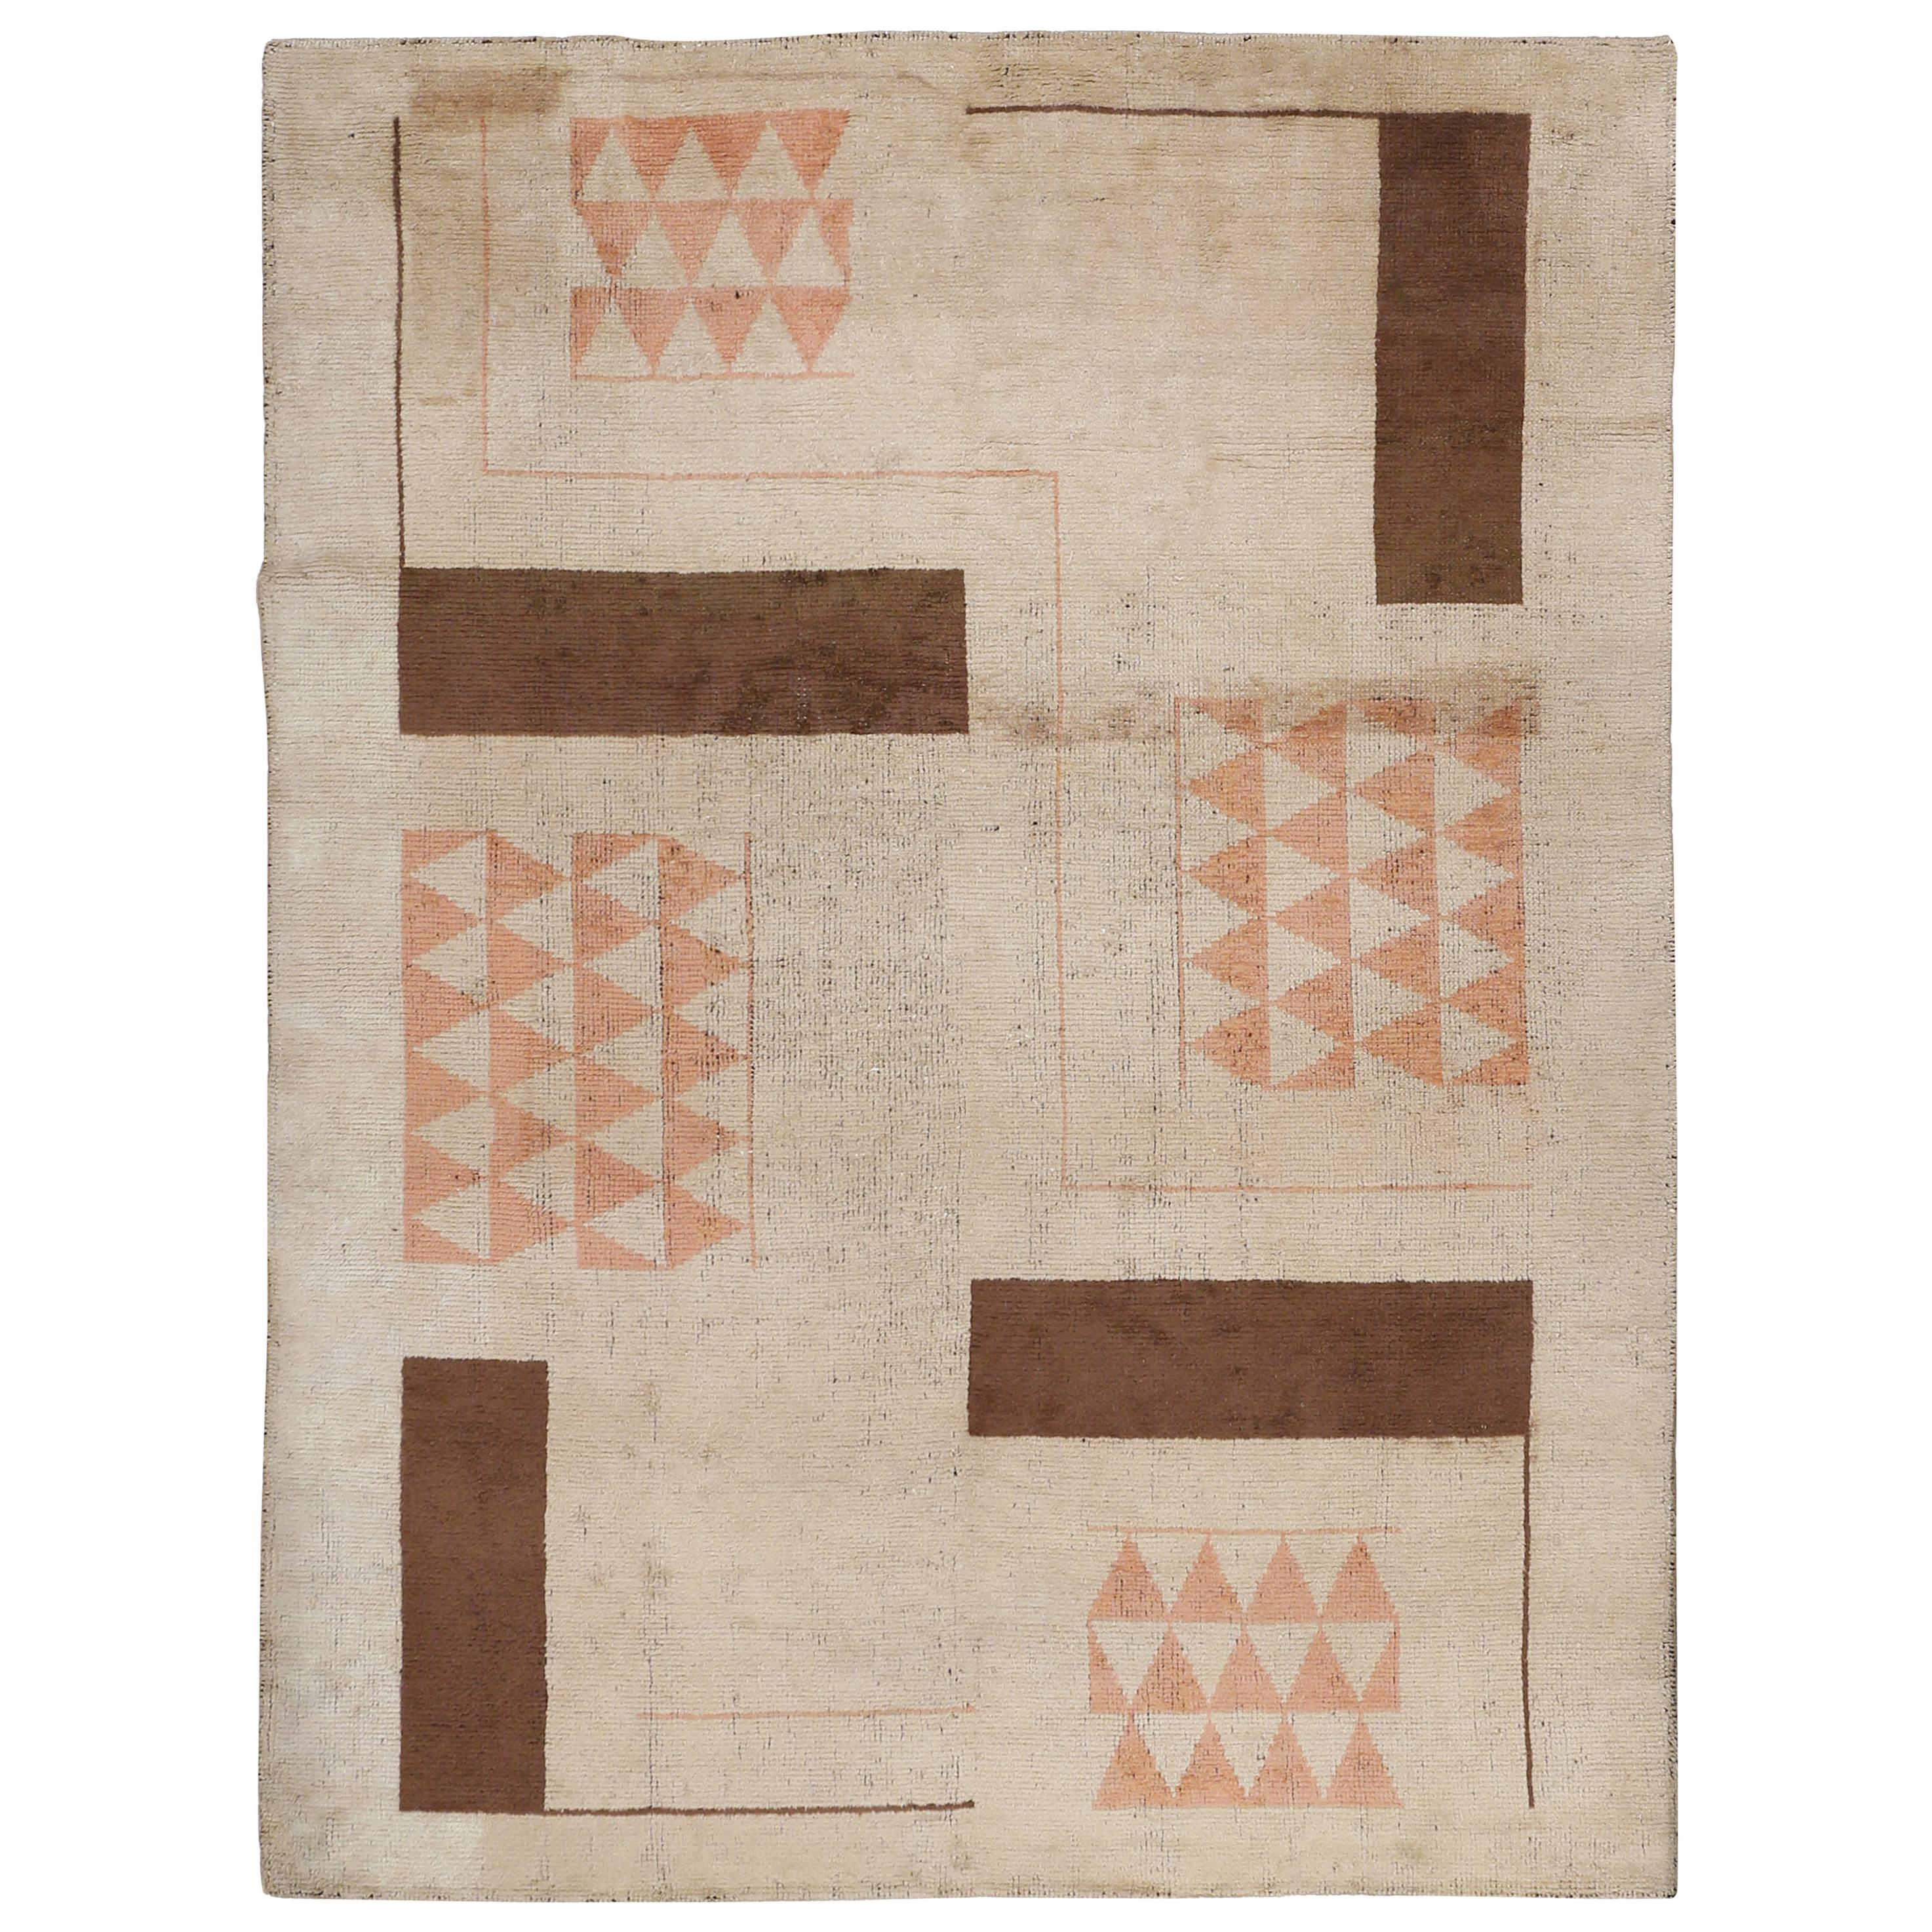 French Art Deco Rug Attributed to Ivan da Silva Bruhns